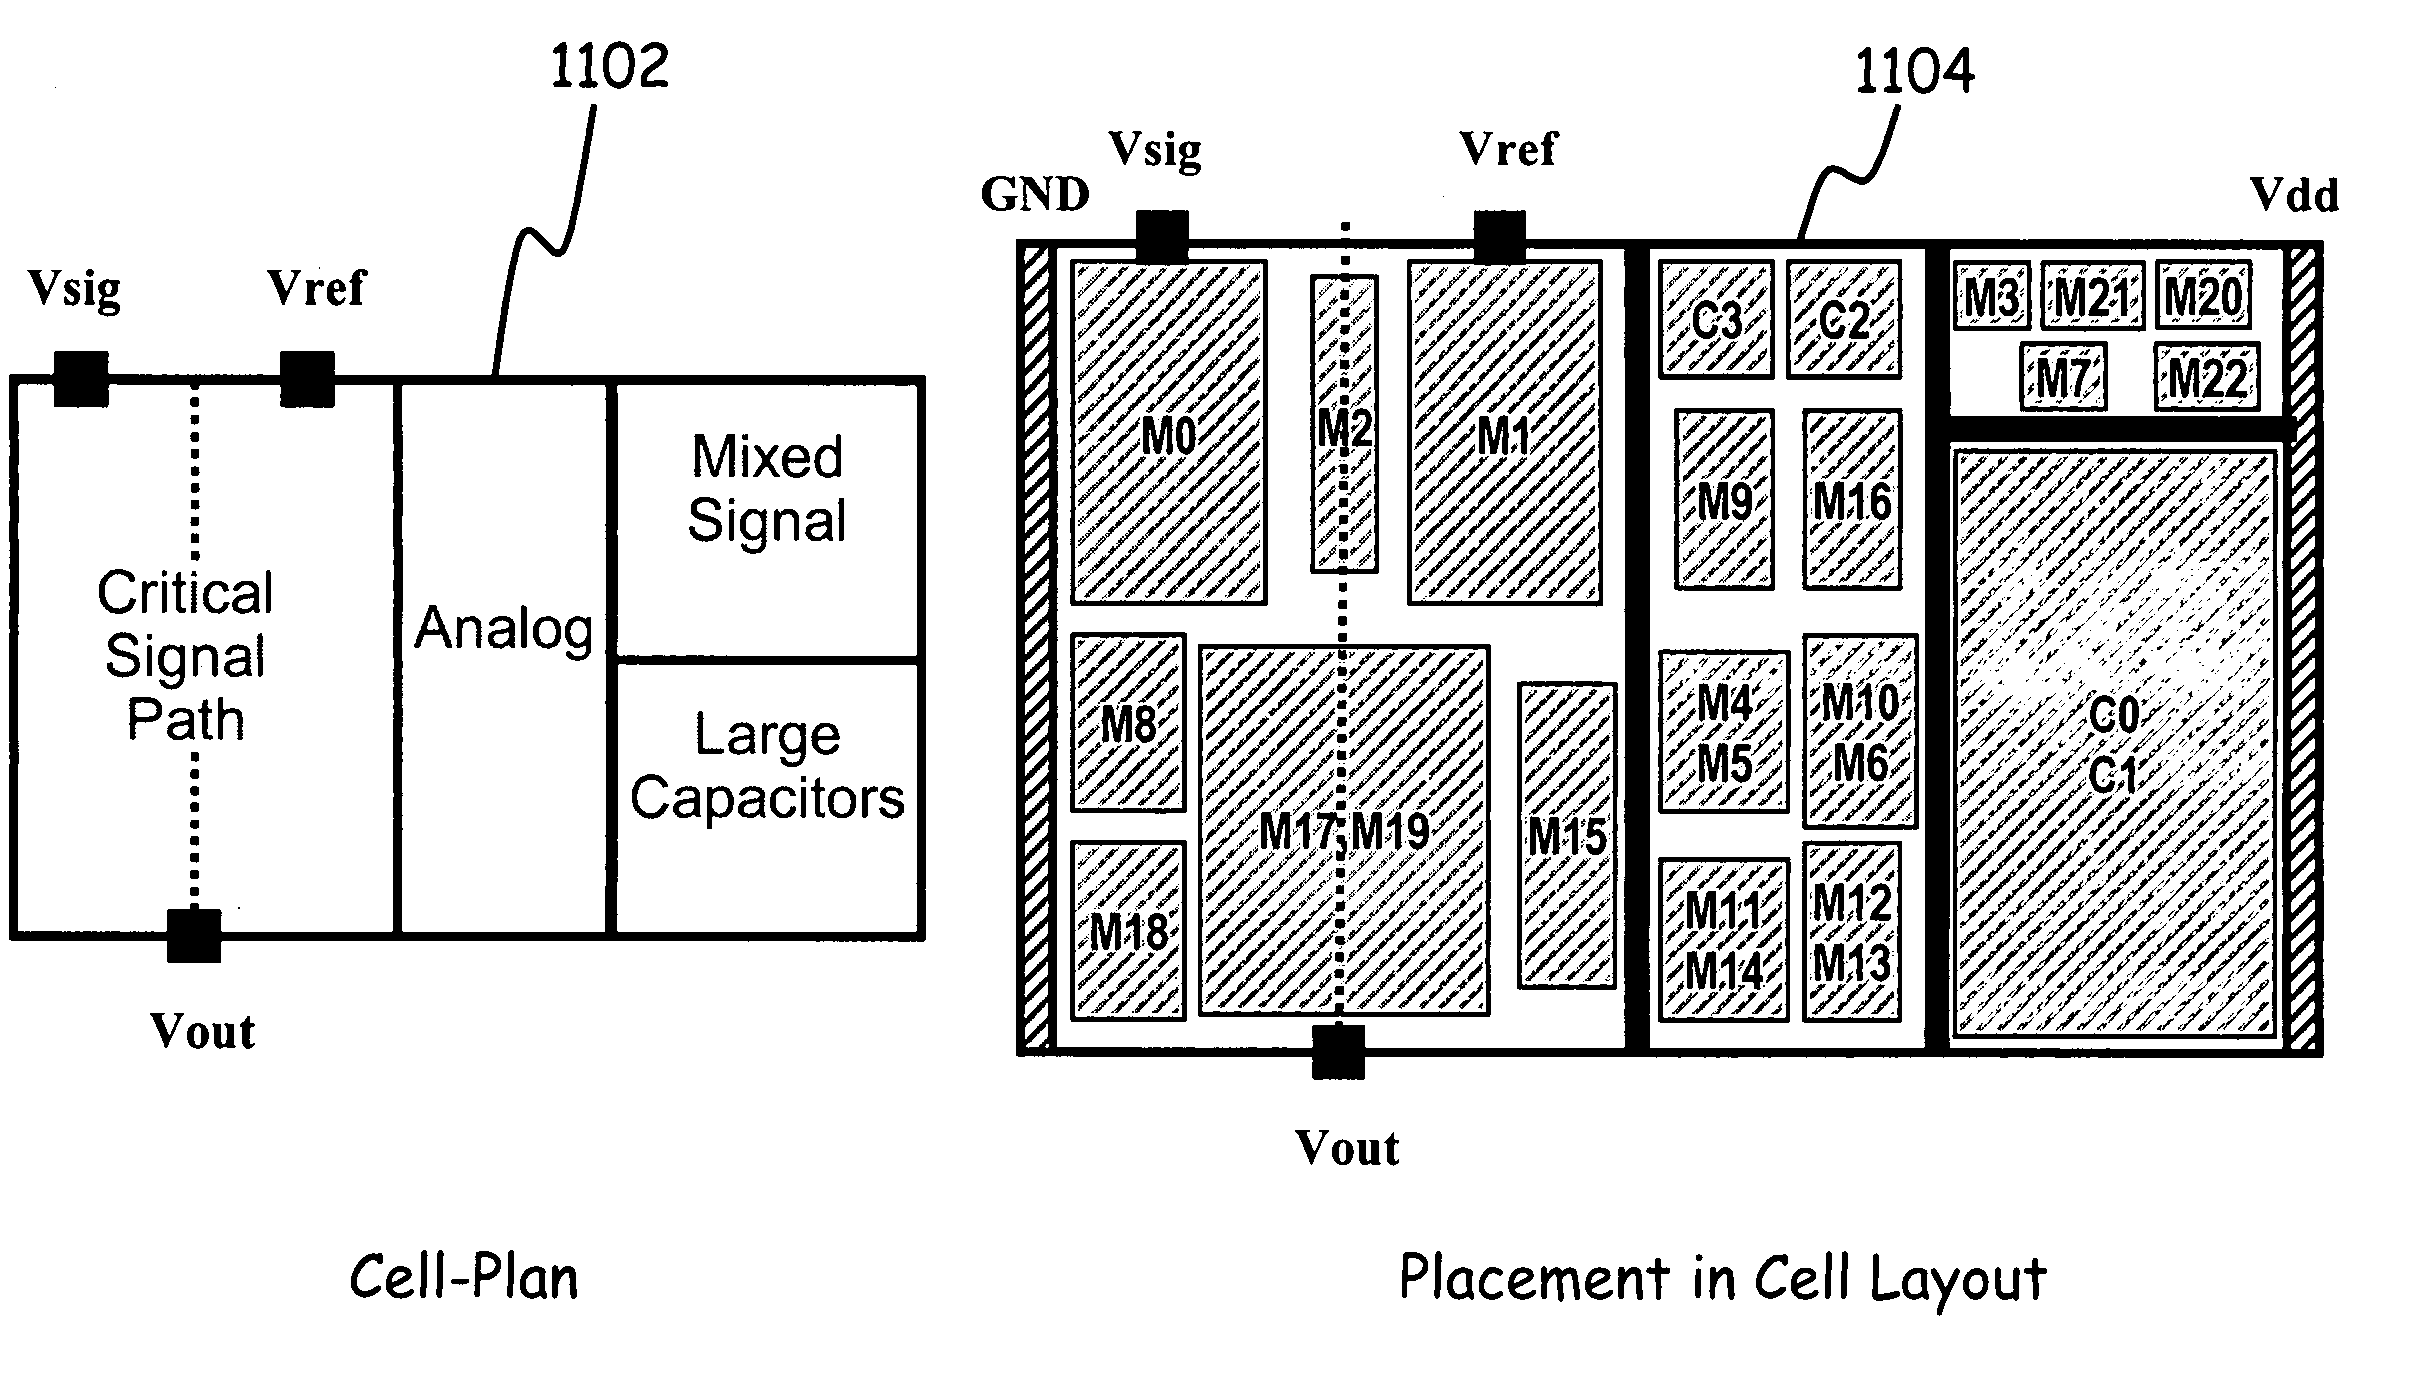 Optimizing circuit layouts by configuring rooms for placing devices